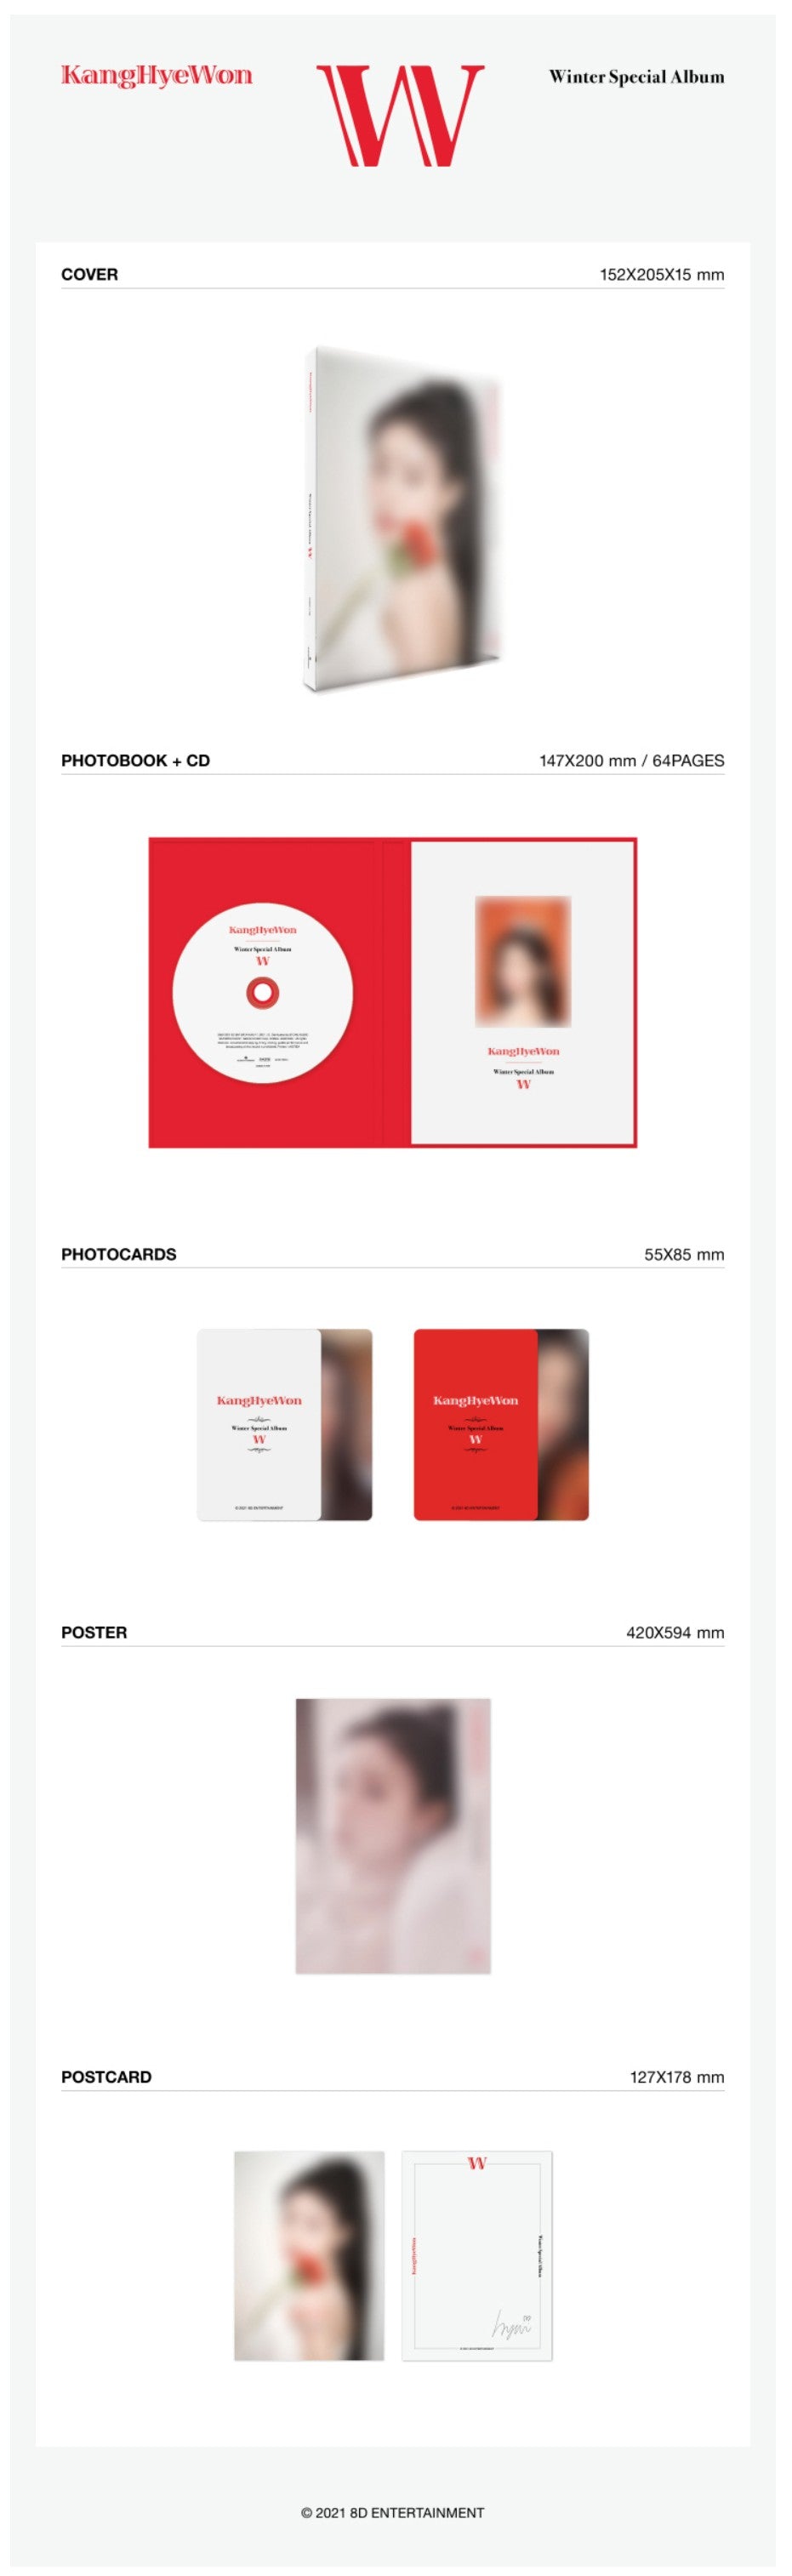 [PREORDER] KANG HYE WON - WINTER SPECIAL ALBUM 'W' [LIMITED]